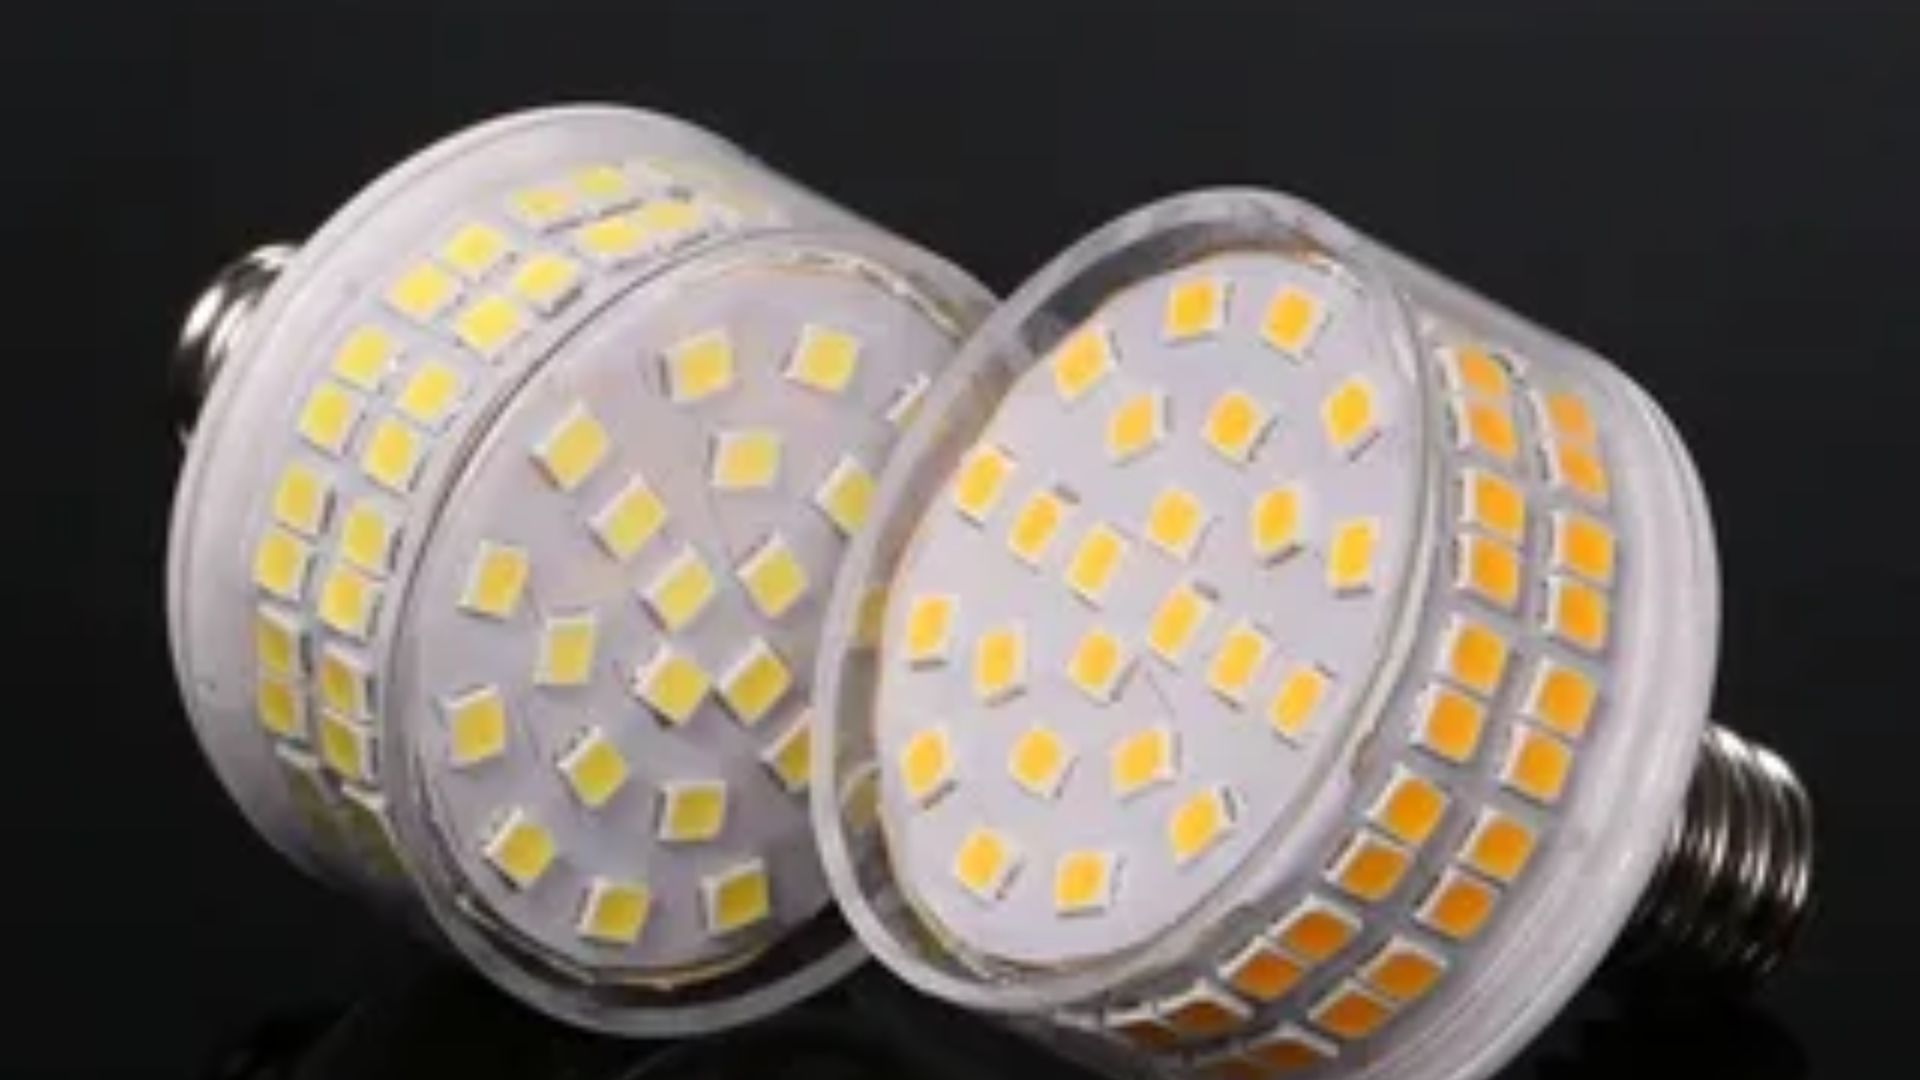 How Can I Ensure the Quality of LED Light Products